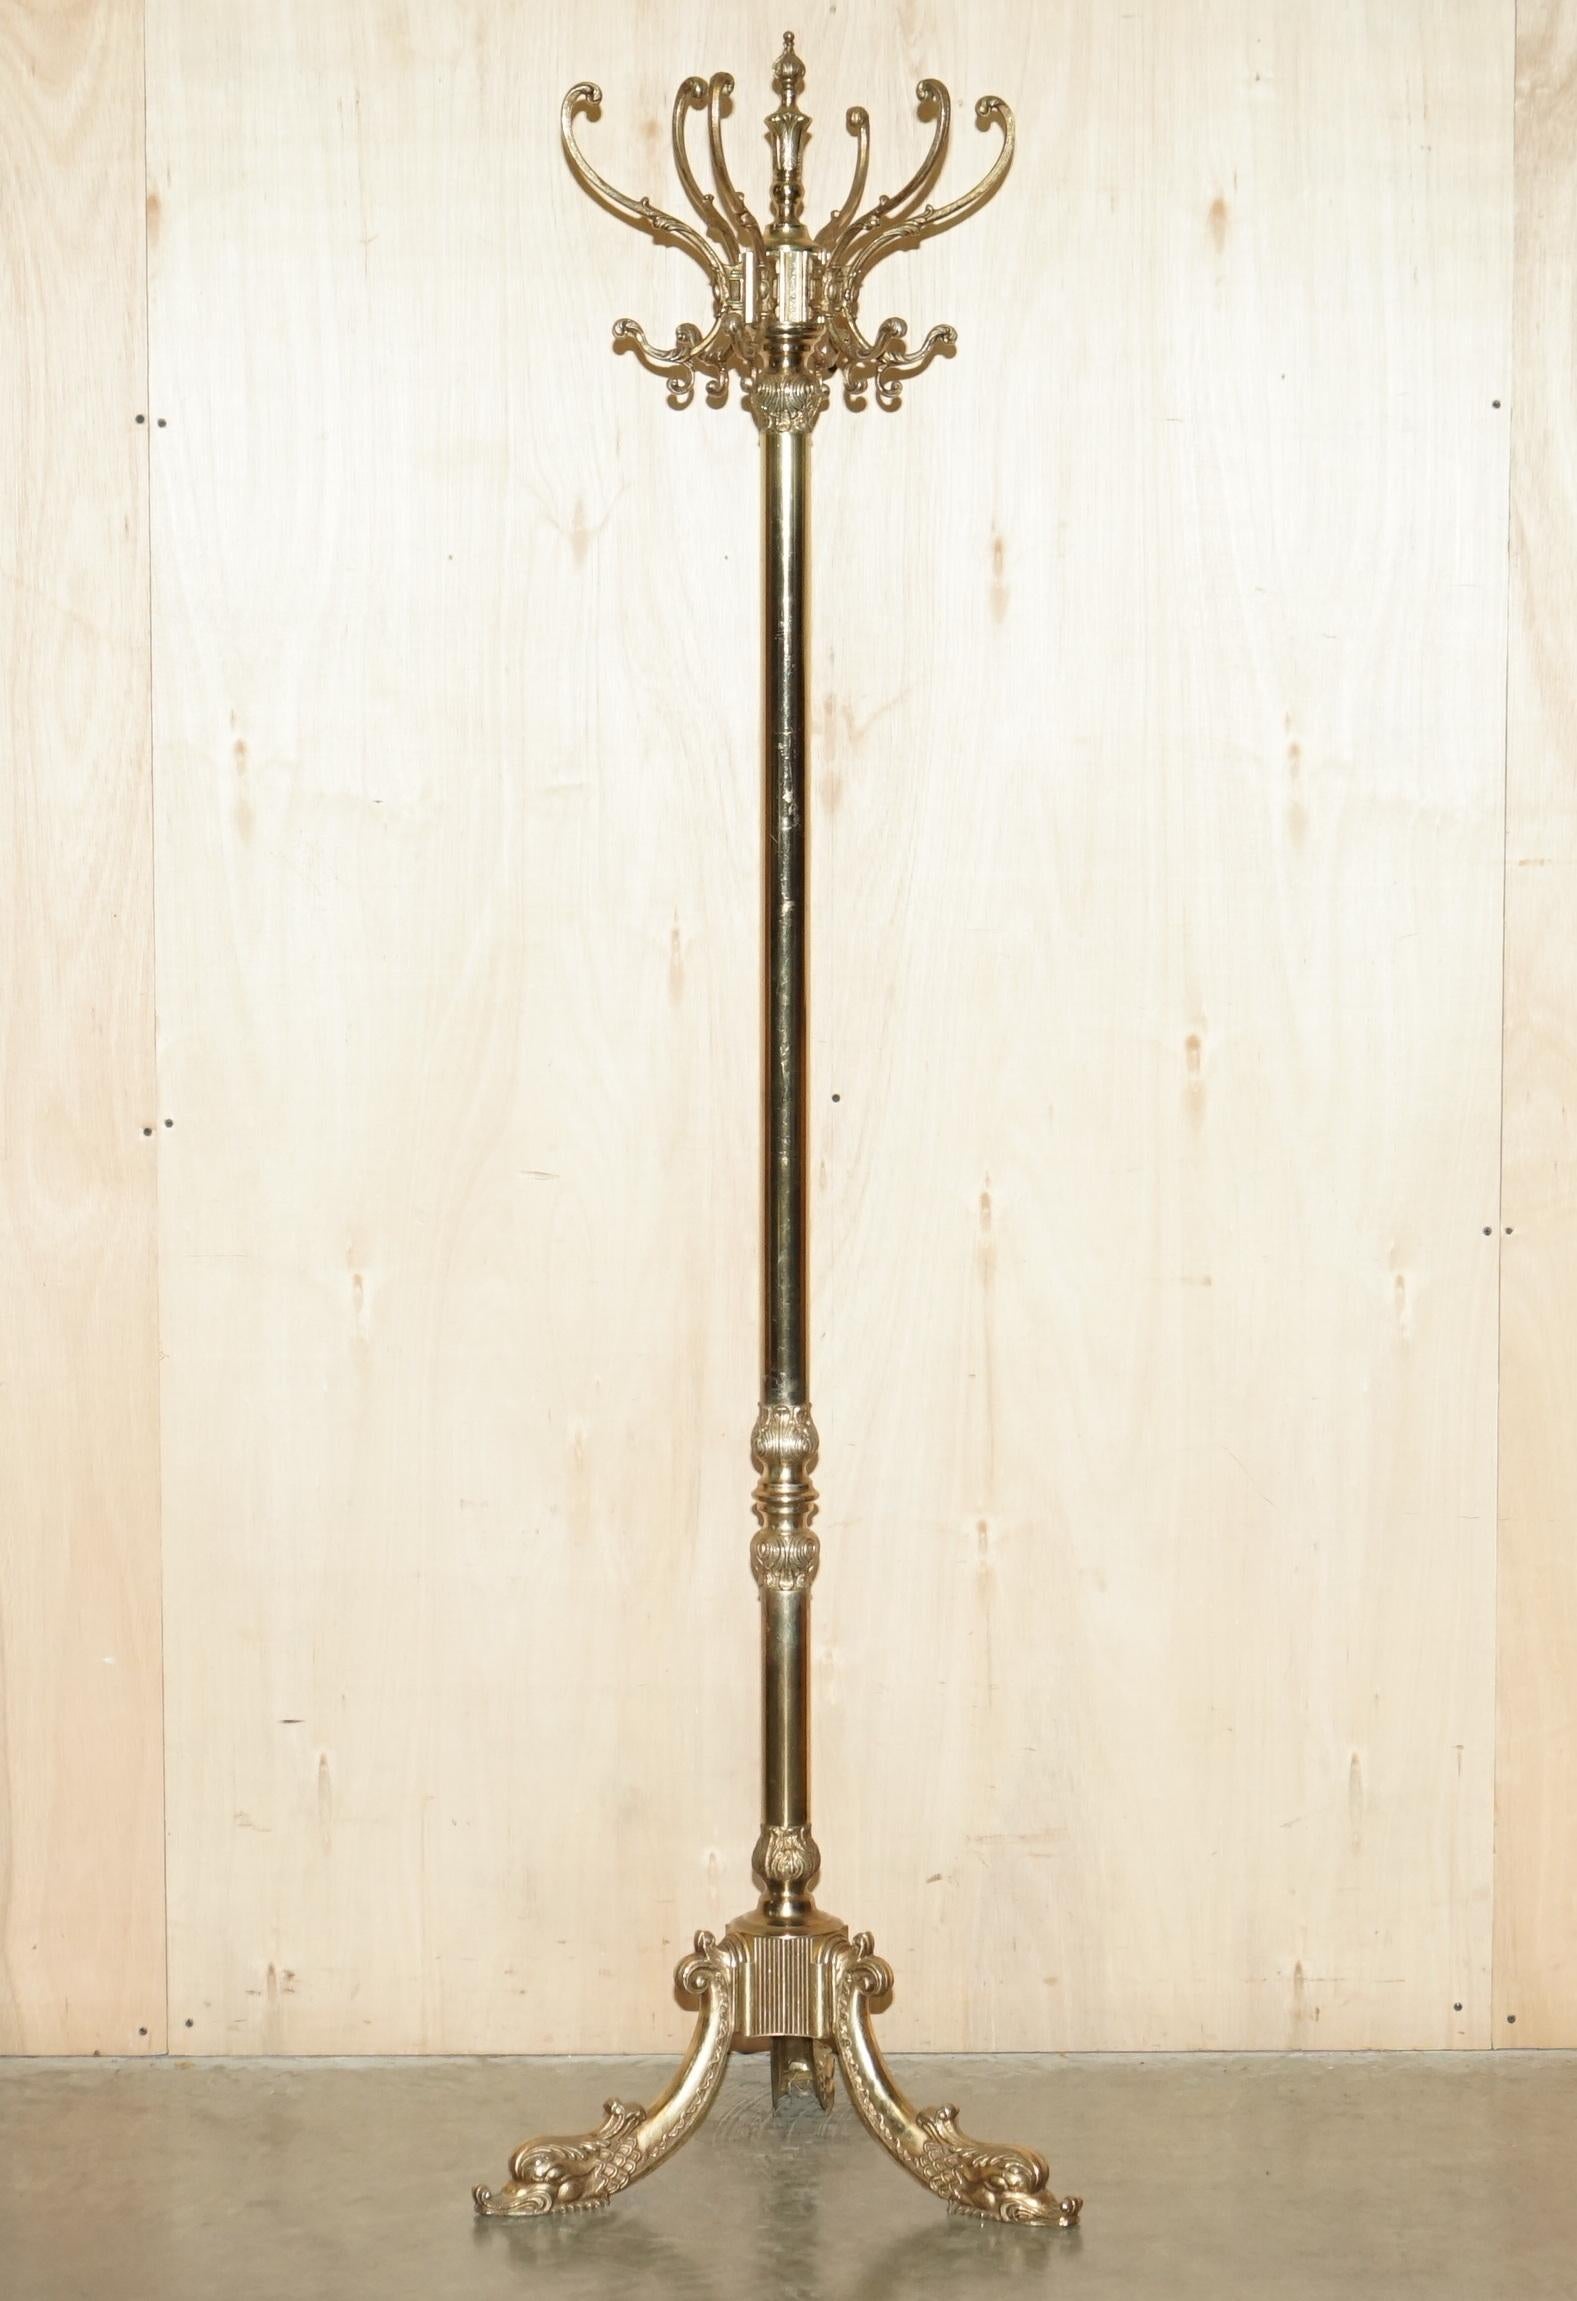 Royal House Antiques

Royal House Antiques is delighted to offer for sale this stunning original English circa 1880-1900 brass hat glove and coat stand with rare Dolphin tripod base

Please note the delivery fee listed is just a guide, it covers